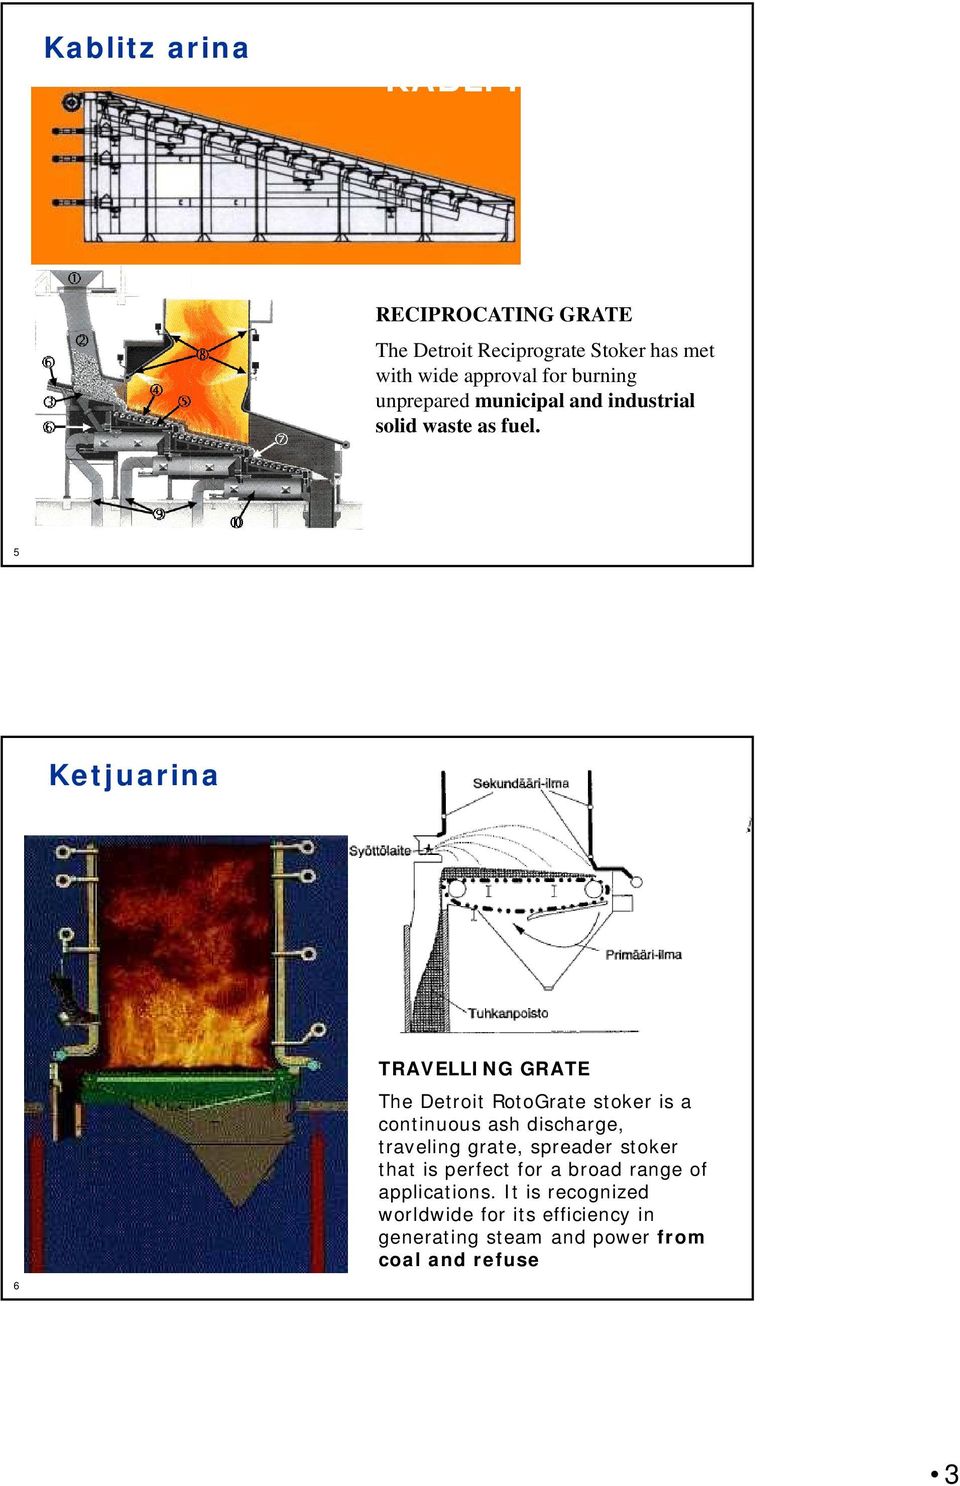 5 Ketjuarina 6 TRAVELLING GRATE The Detroit RotoGrate stoker is a continuous ash discharge, traveling grate,